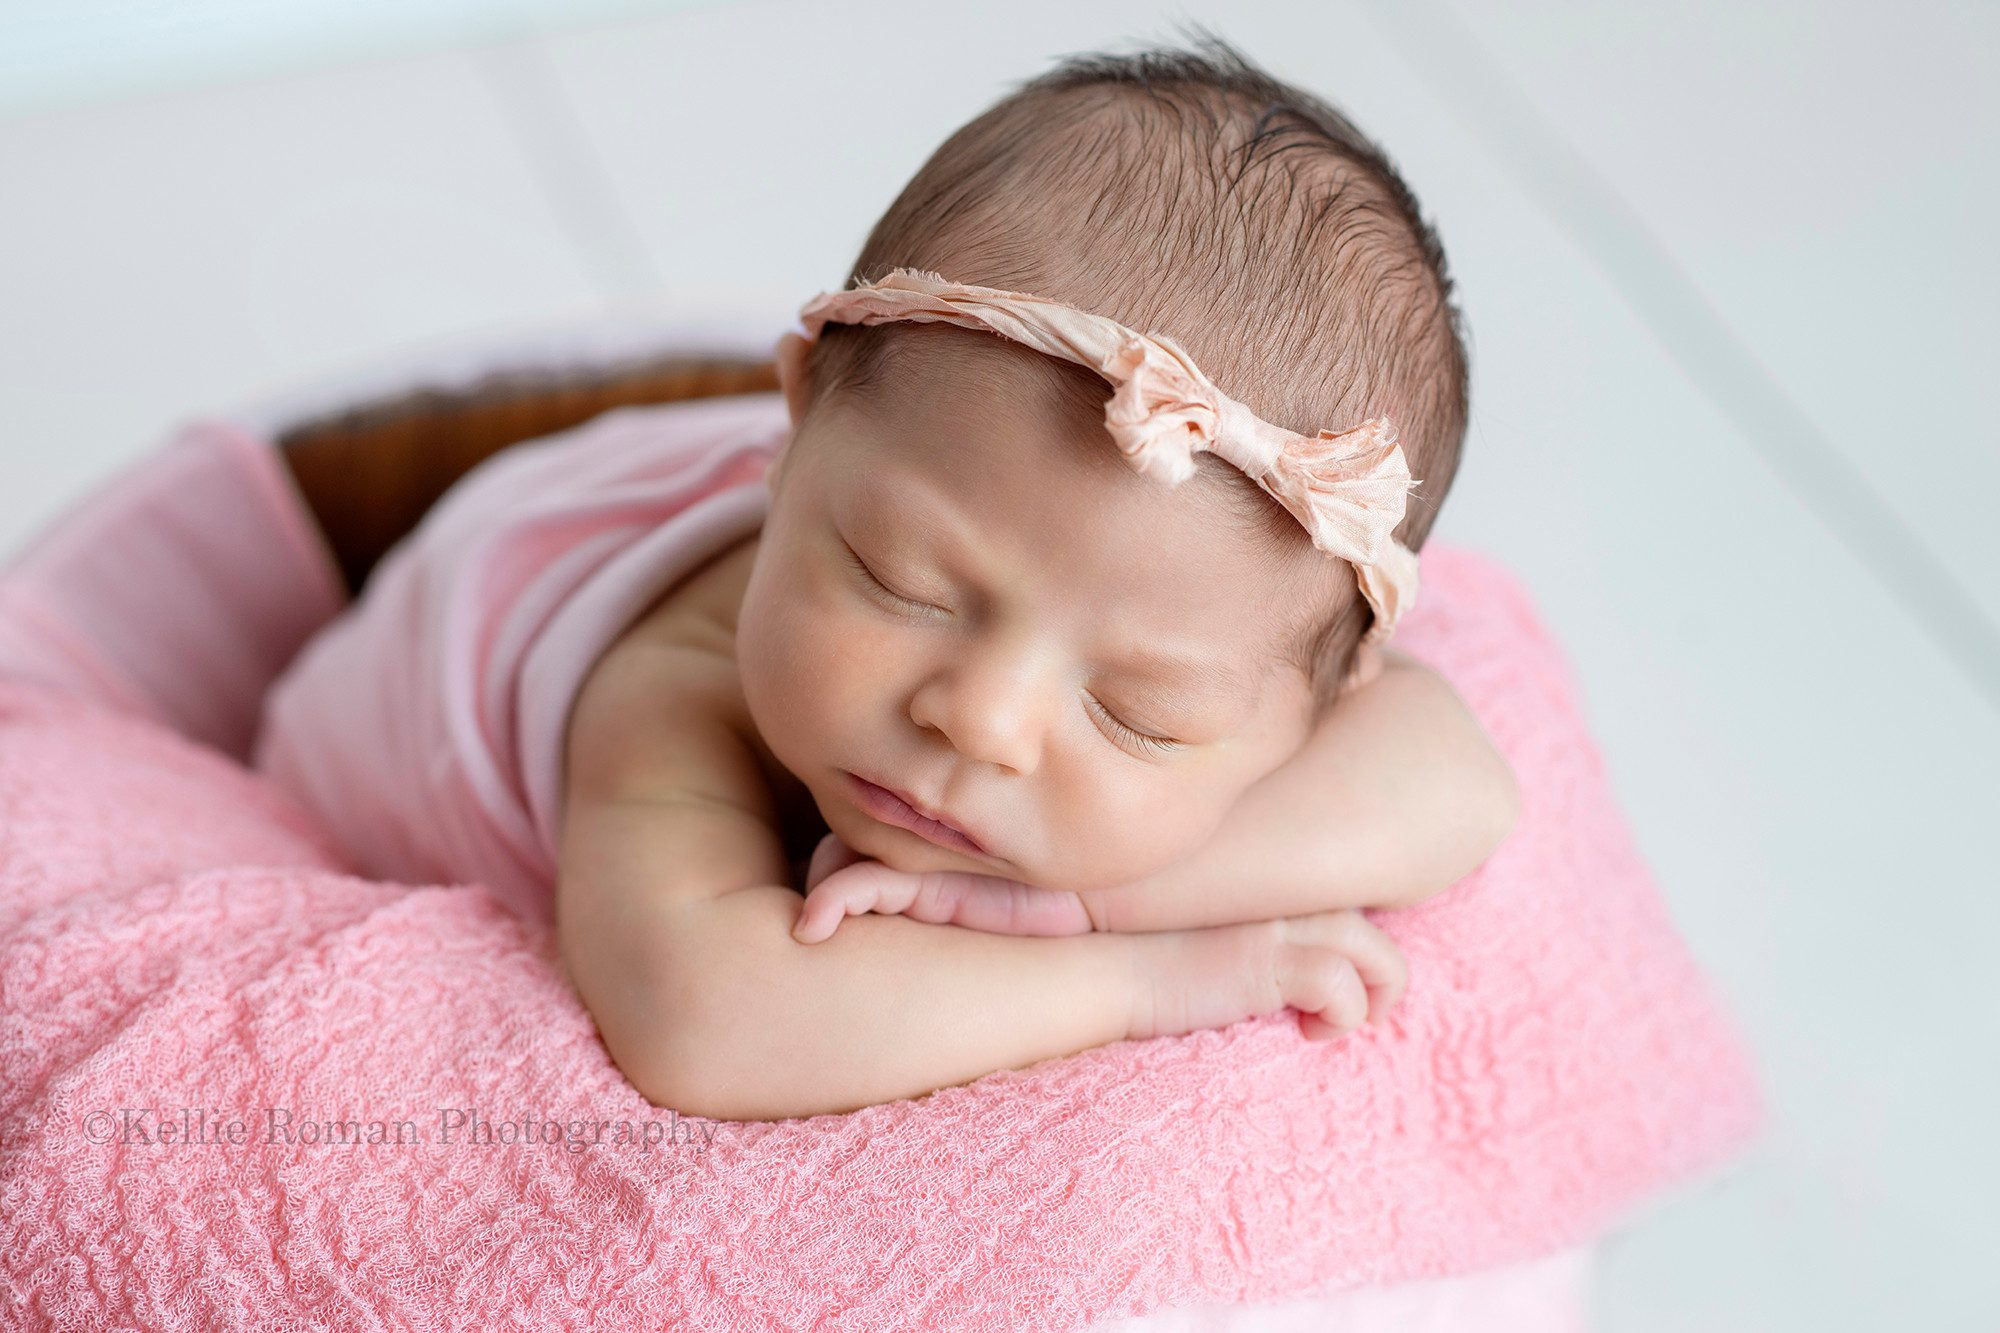 little sister a newborn baby girl is posed in a milwaukee photo studio upright in a white wood bucket there are pink layering fabrics in the bucket the girl has her chin resting on her hands and has a light pink bow headband on